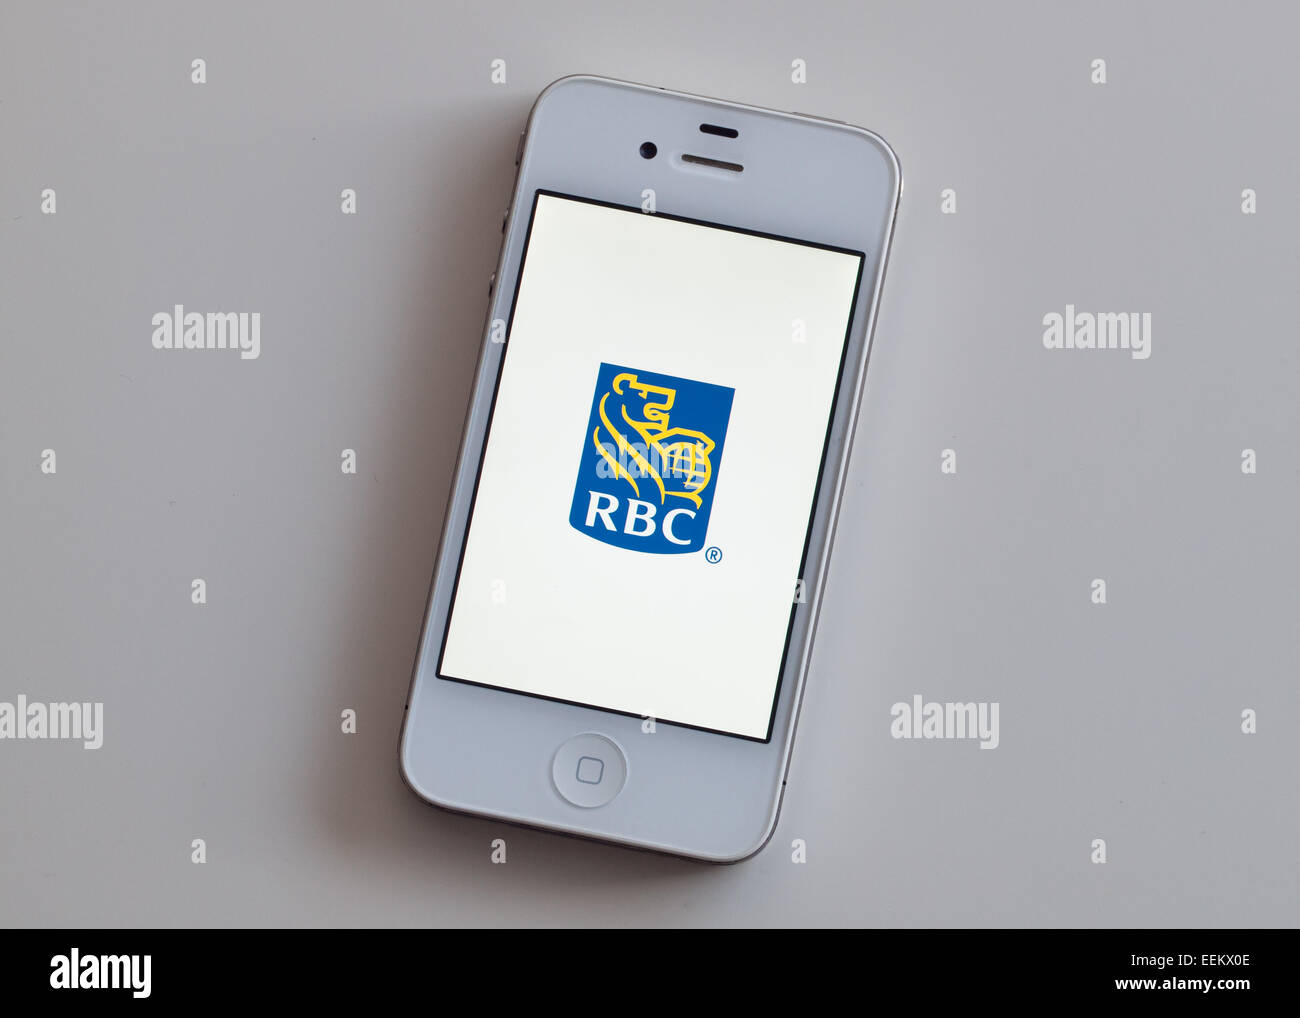 A view of the homescreen from the RBC (Royal Bank of Canada) mobile app on a white Apple iPhone 4. Stock Photo